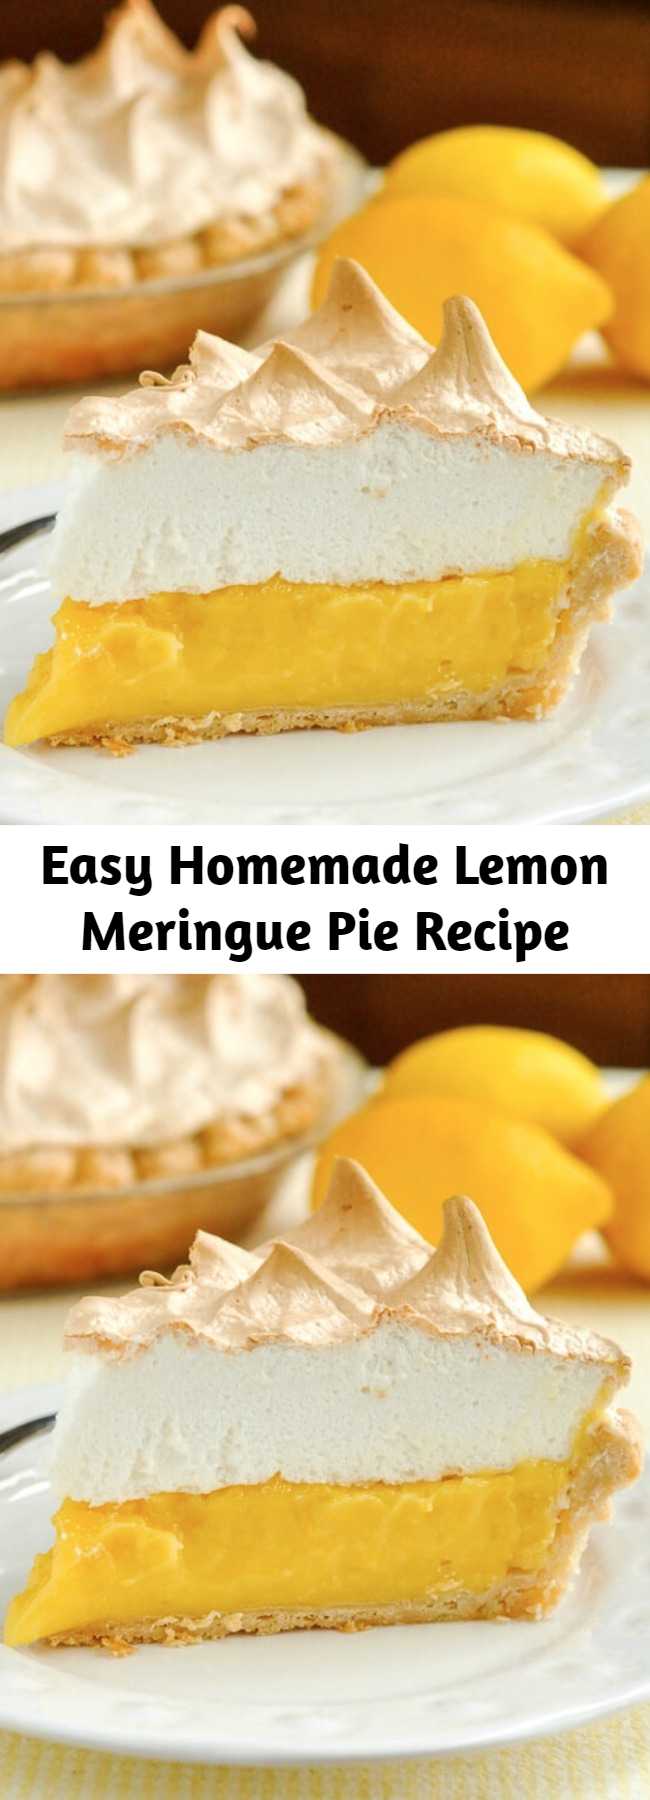 Easy Homemade Lemon Meringue Pie Recipe - If your pie comes from powder in a box, STOP! A fantastic homemade lemon meringue pie, made completely from scratch, tastes much better and is actually just as easy to prepare.